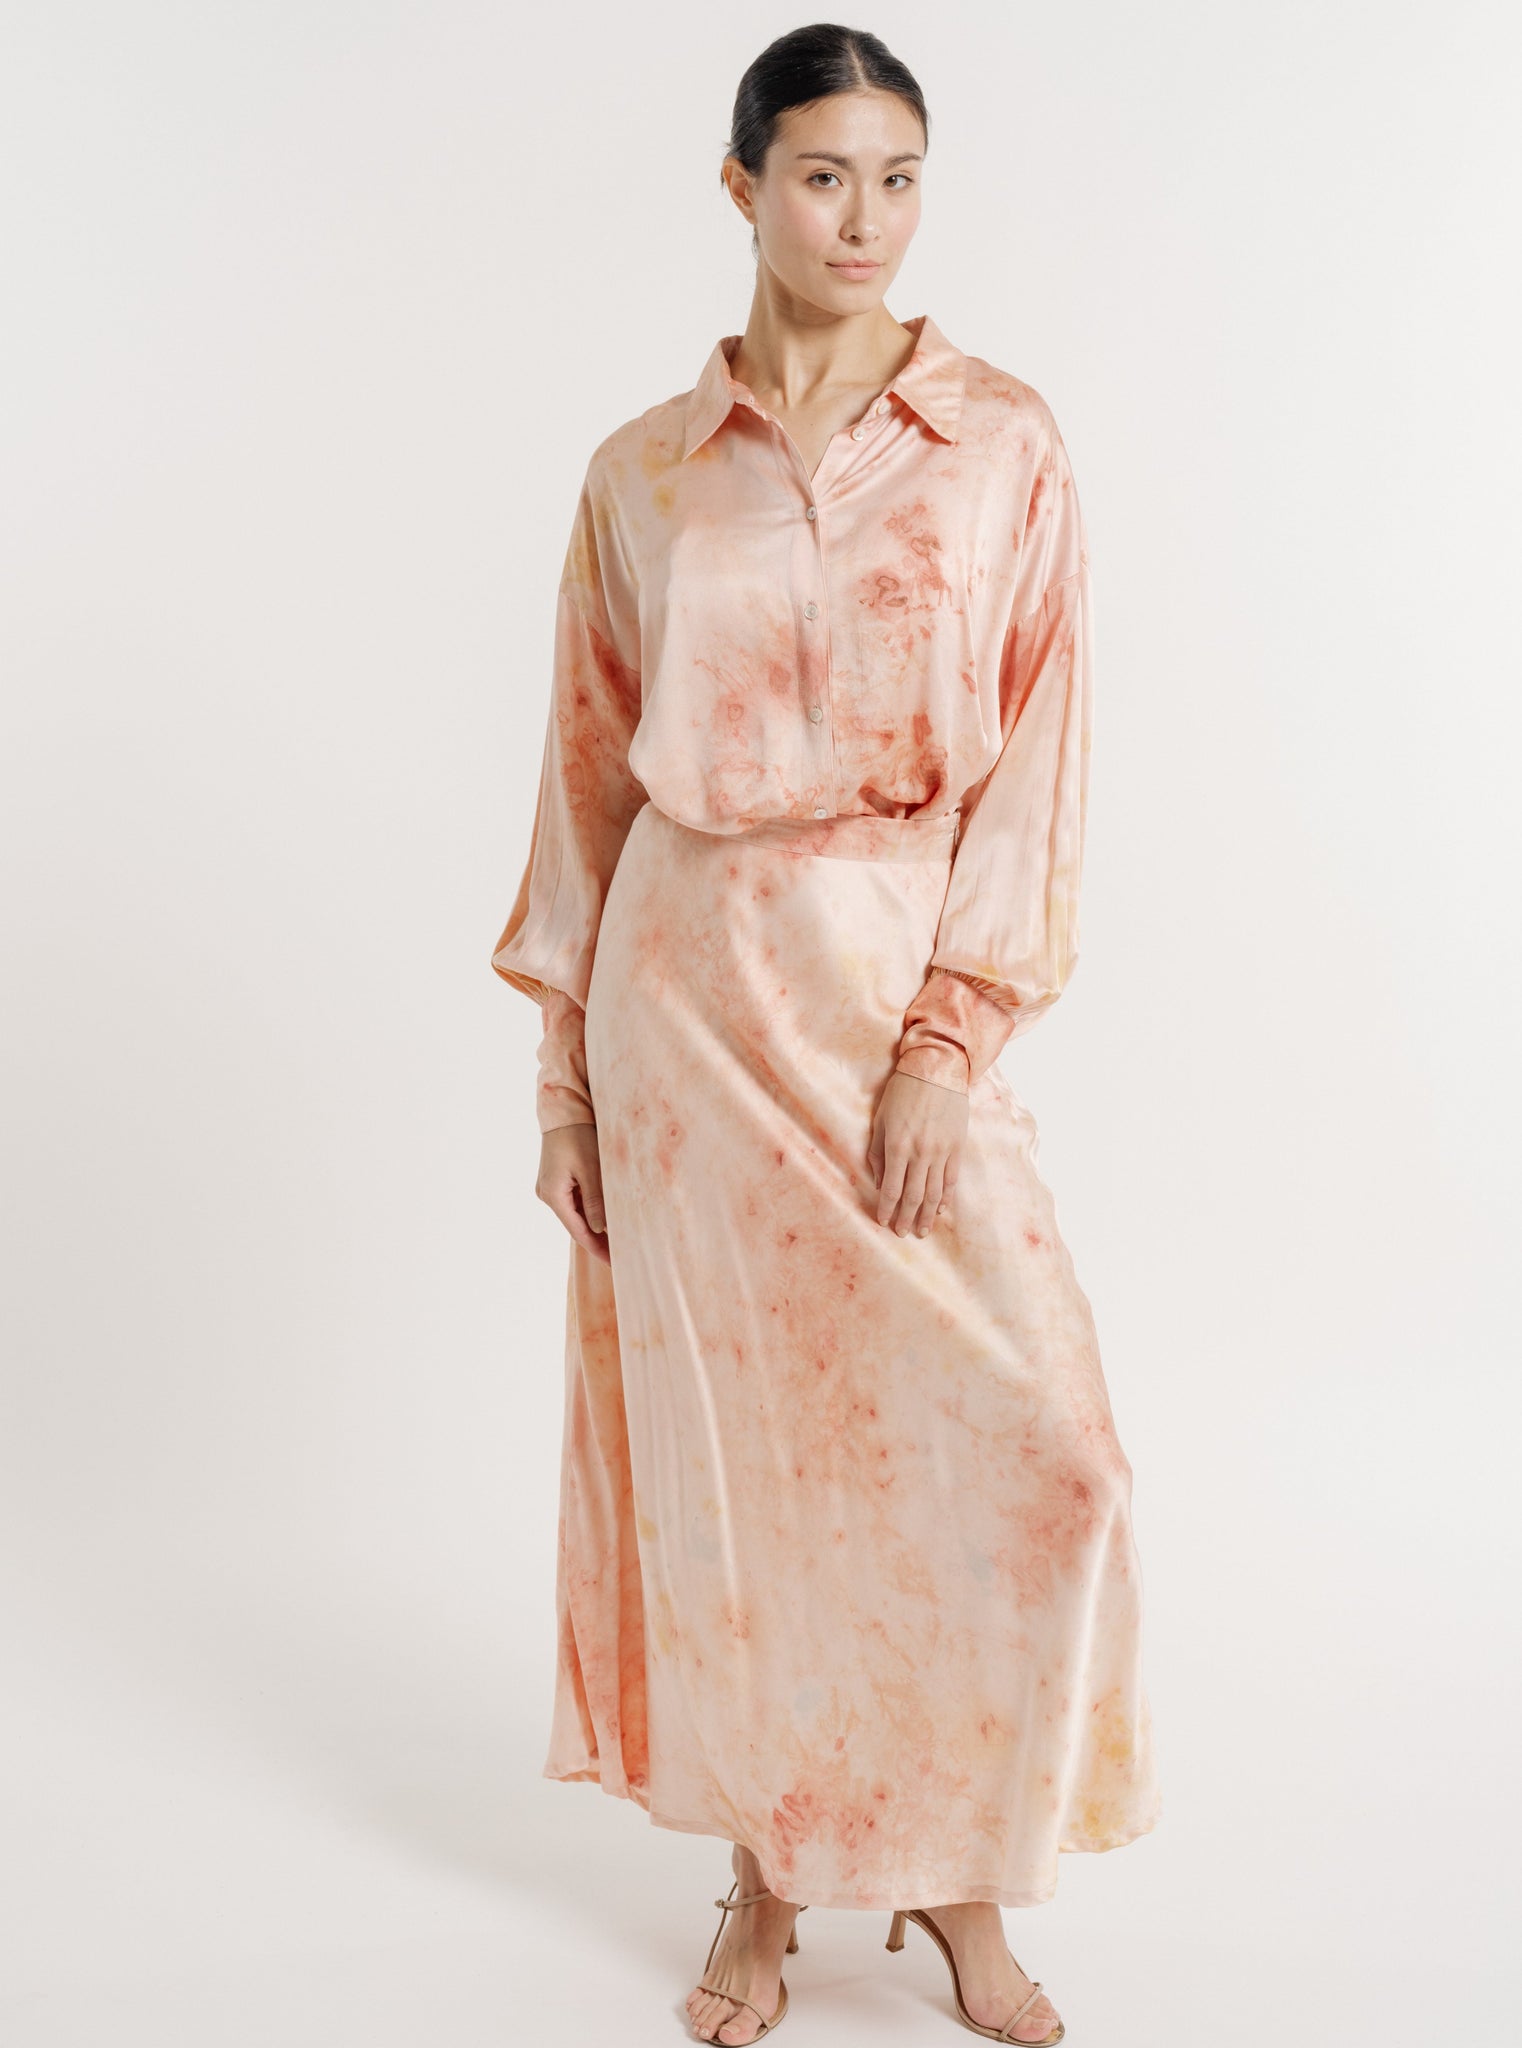 Woman posing in a Museo Silk Button Up - Botanical Ice Dye, peach-toned watercolor dress.